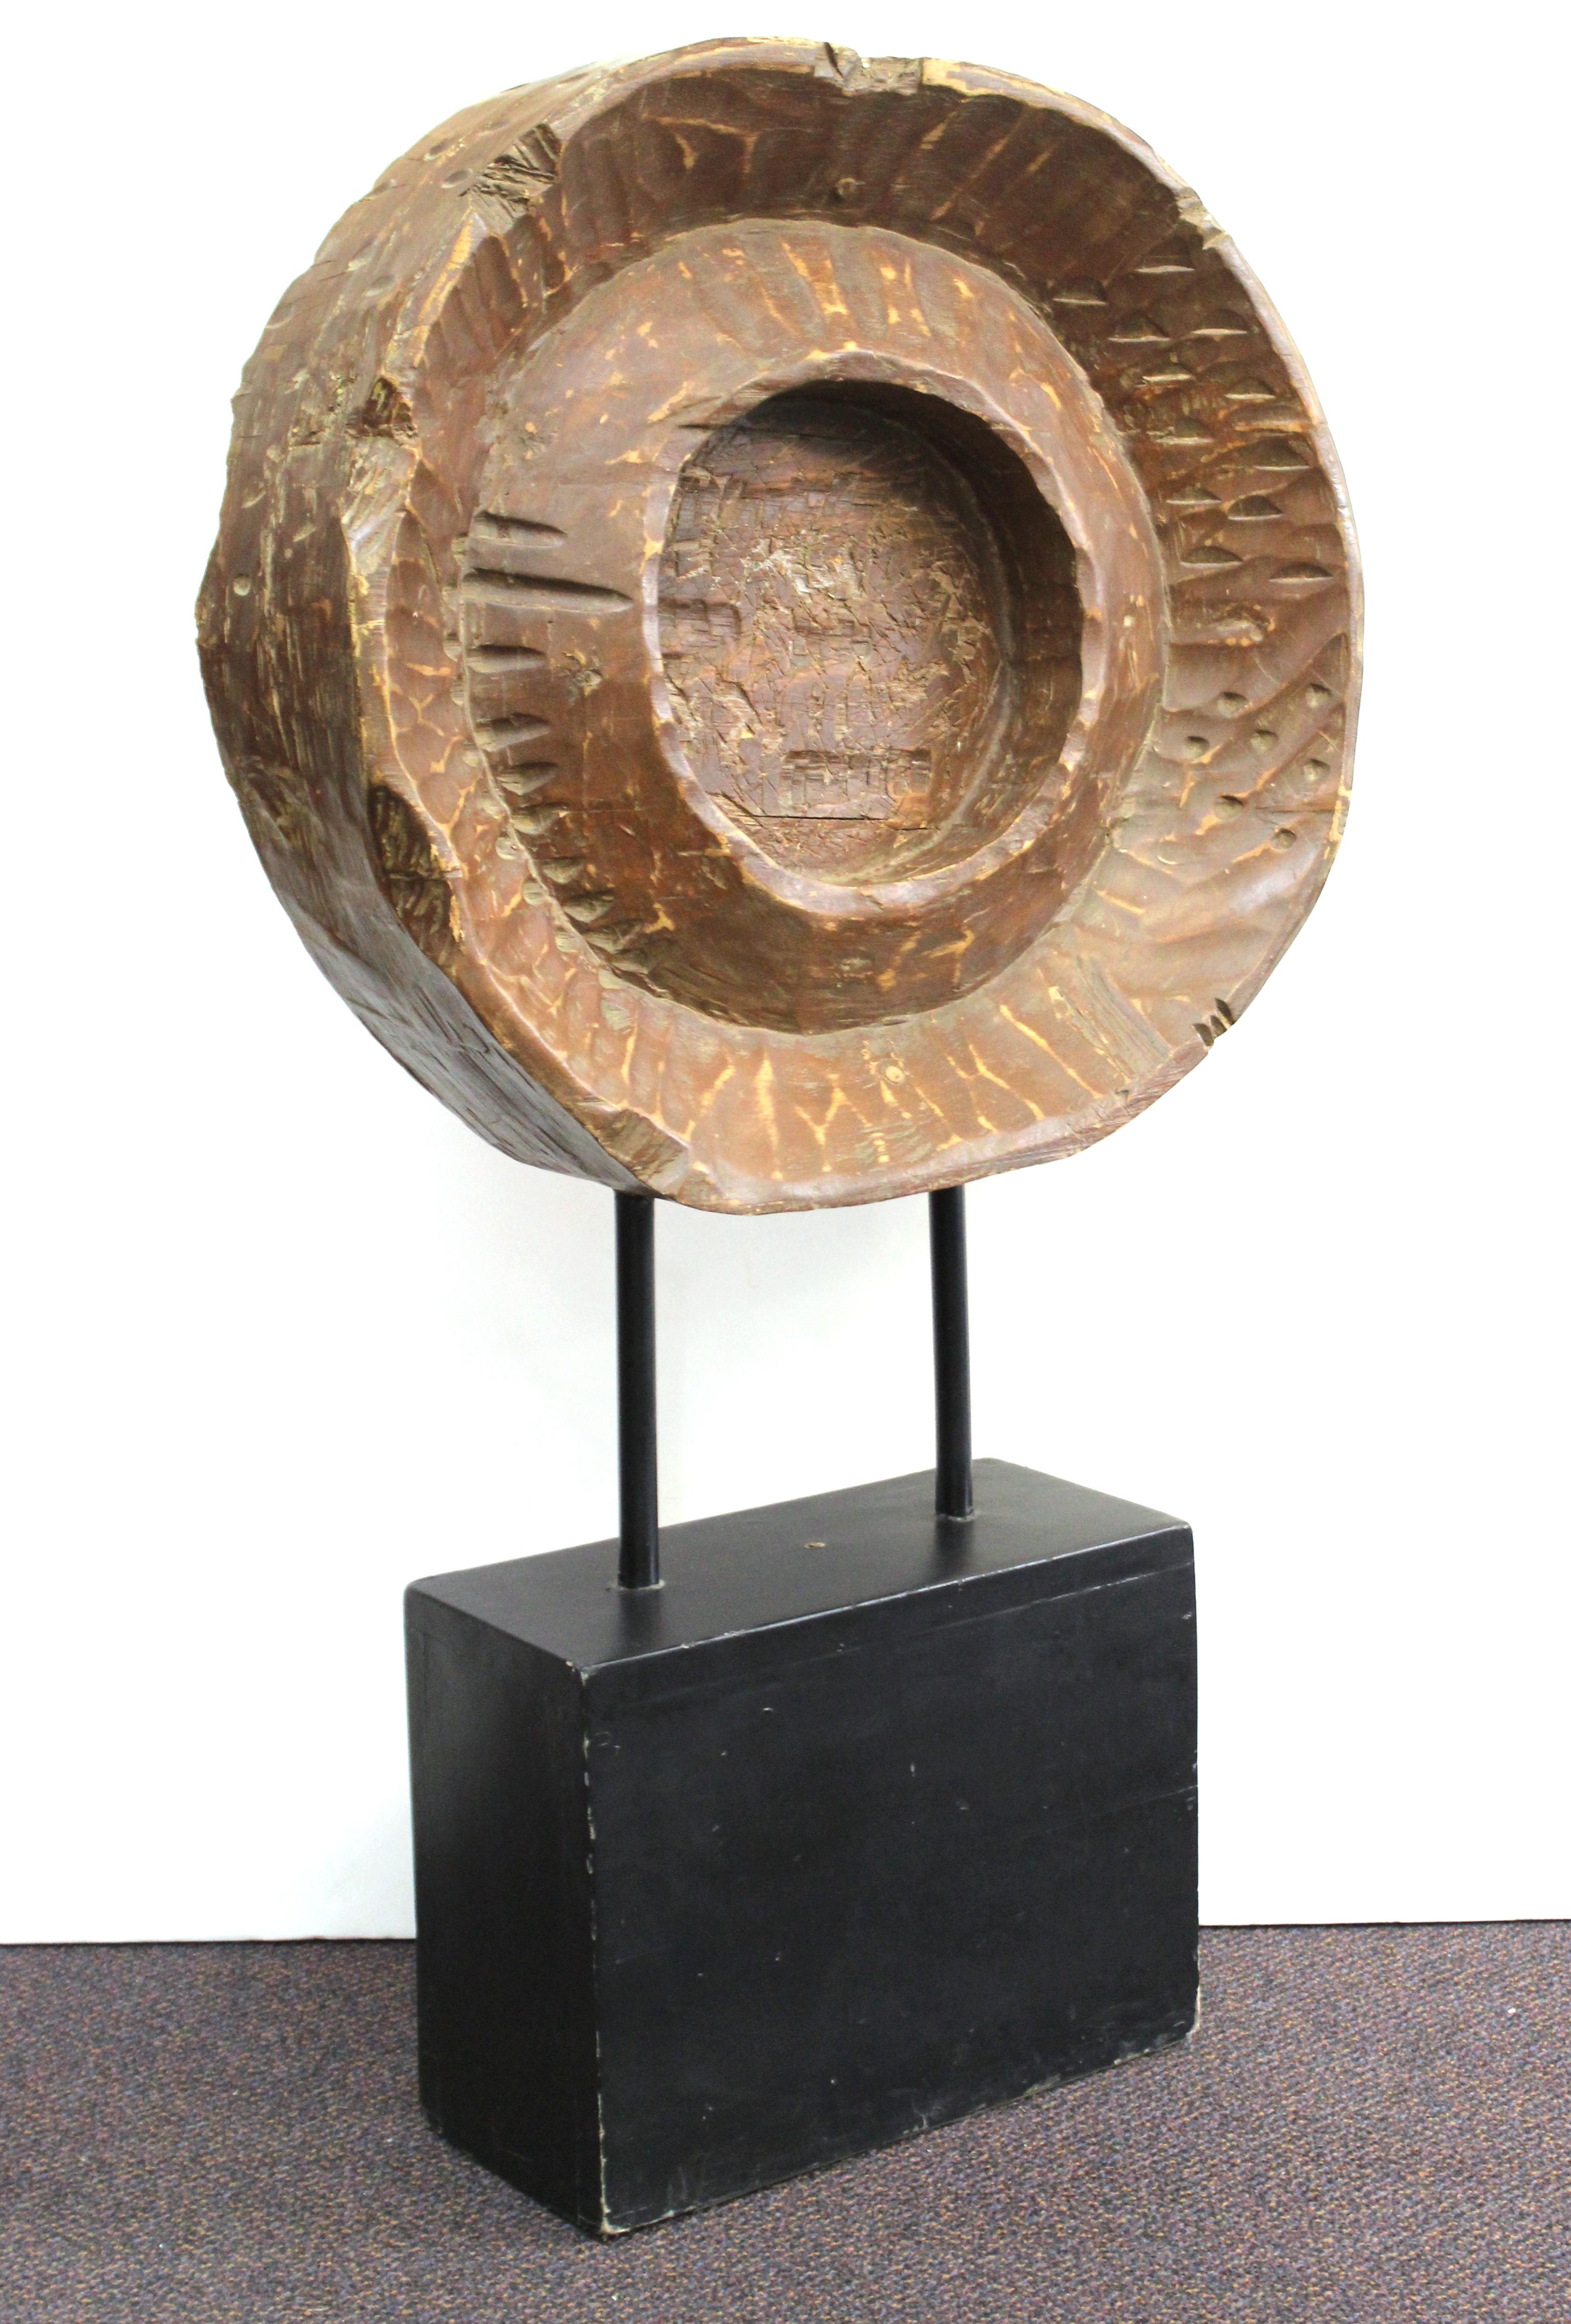 Brutalist modern monumental carved wooden disc or wheel-shape mounted atop an ebonized base. The piece was likely made during the mid-20th century and is unsigned. In great vintage condition with age-appropriate wear and use.